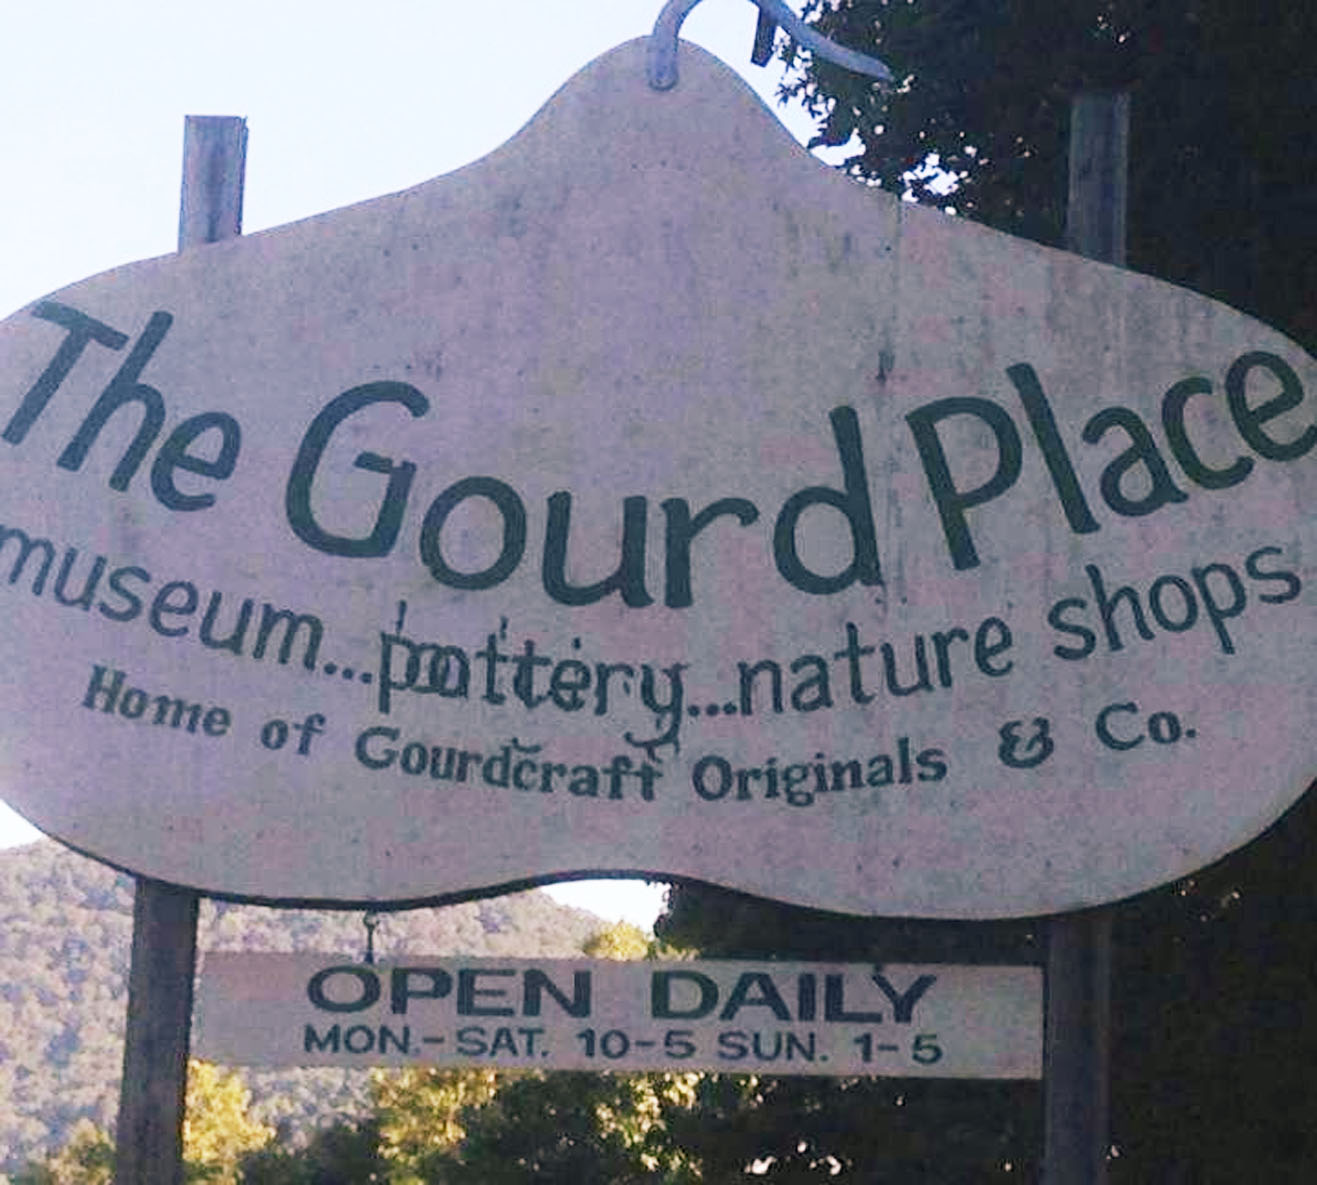 The Gourd Place